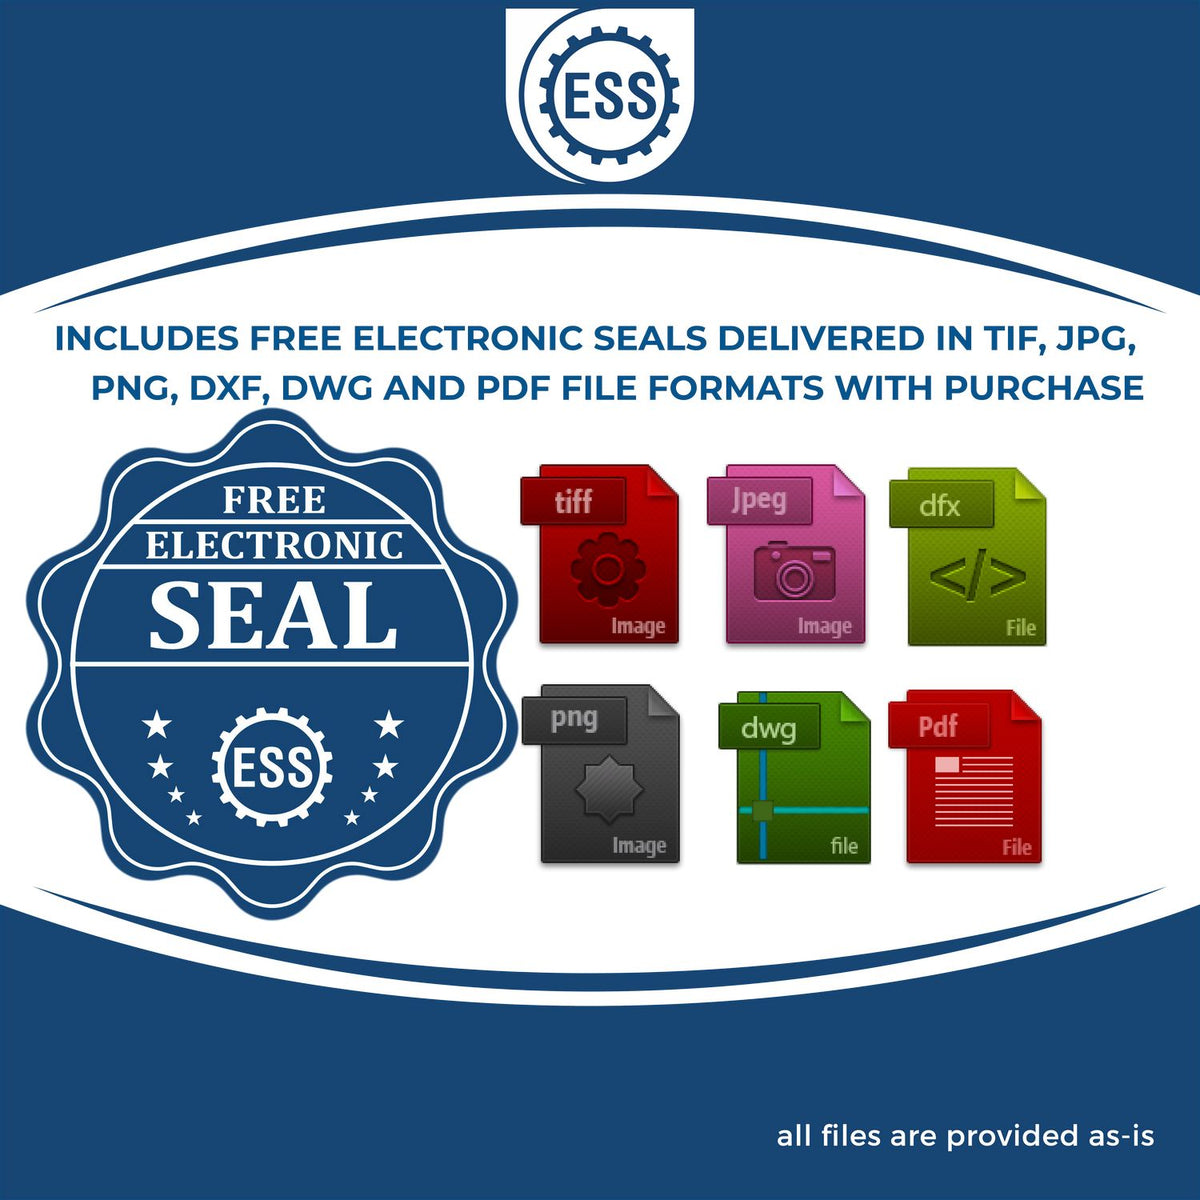 An infographic for the free electronic seal for the Hybrid South Dakota Architect Seal illustrating the different file type icons such as DXF, DWG, TIF, JPG and PNG.